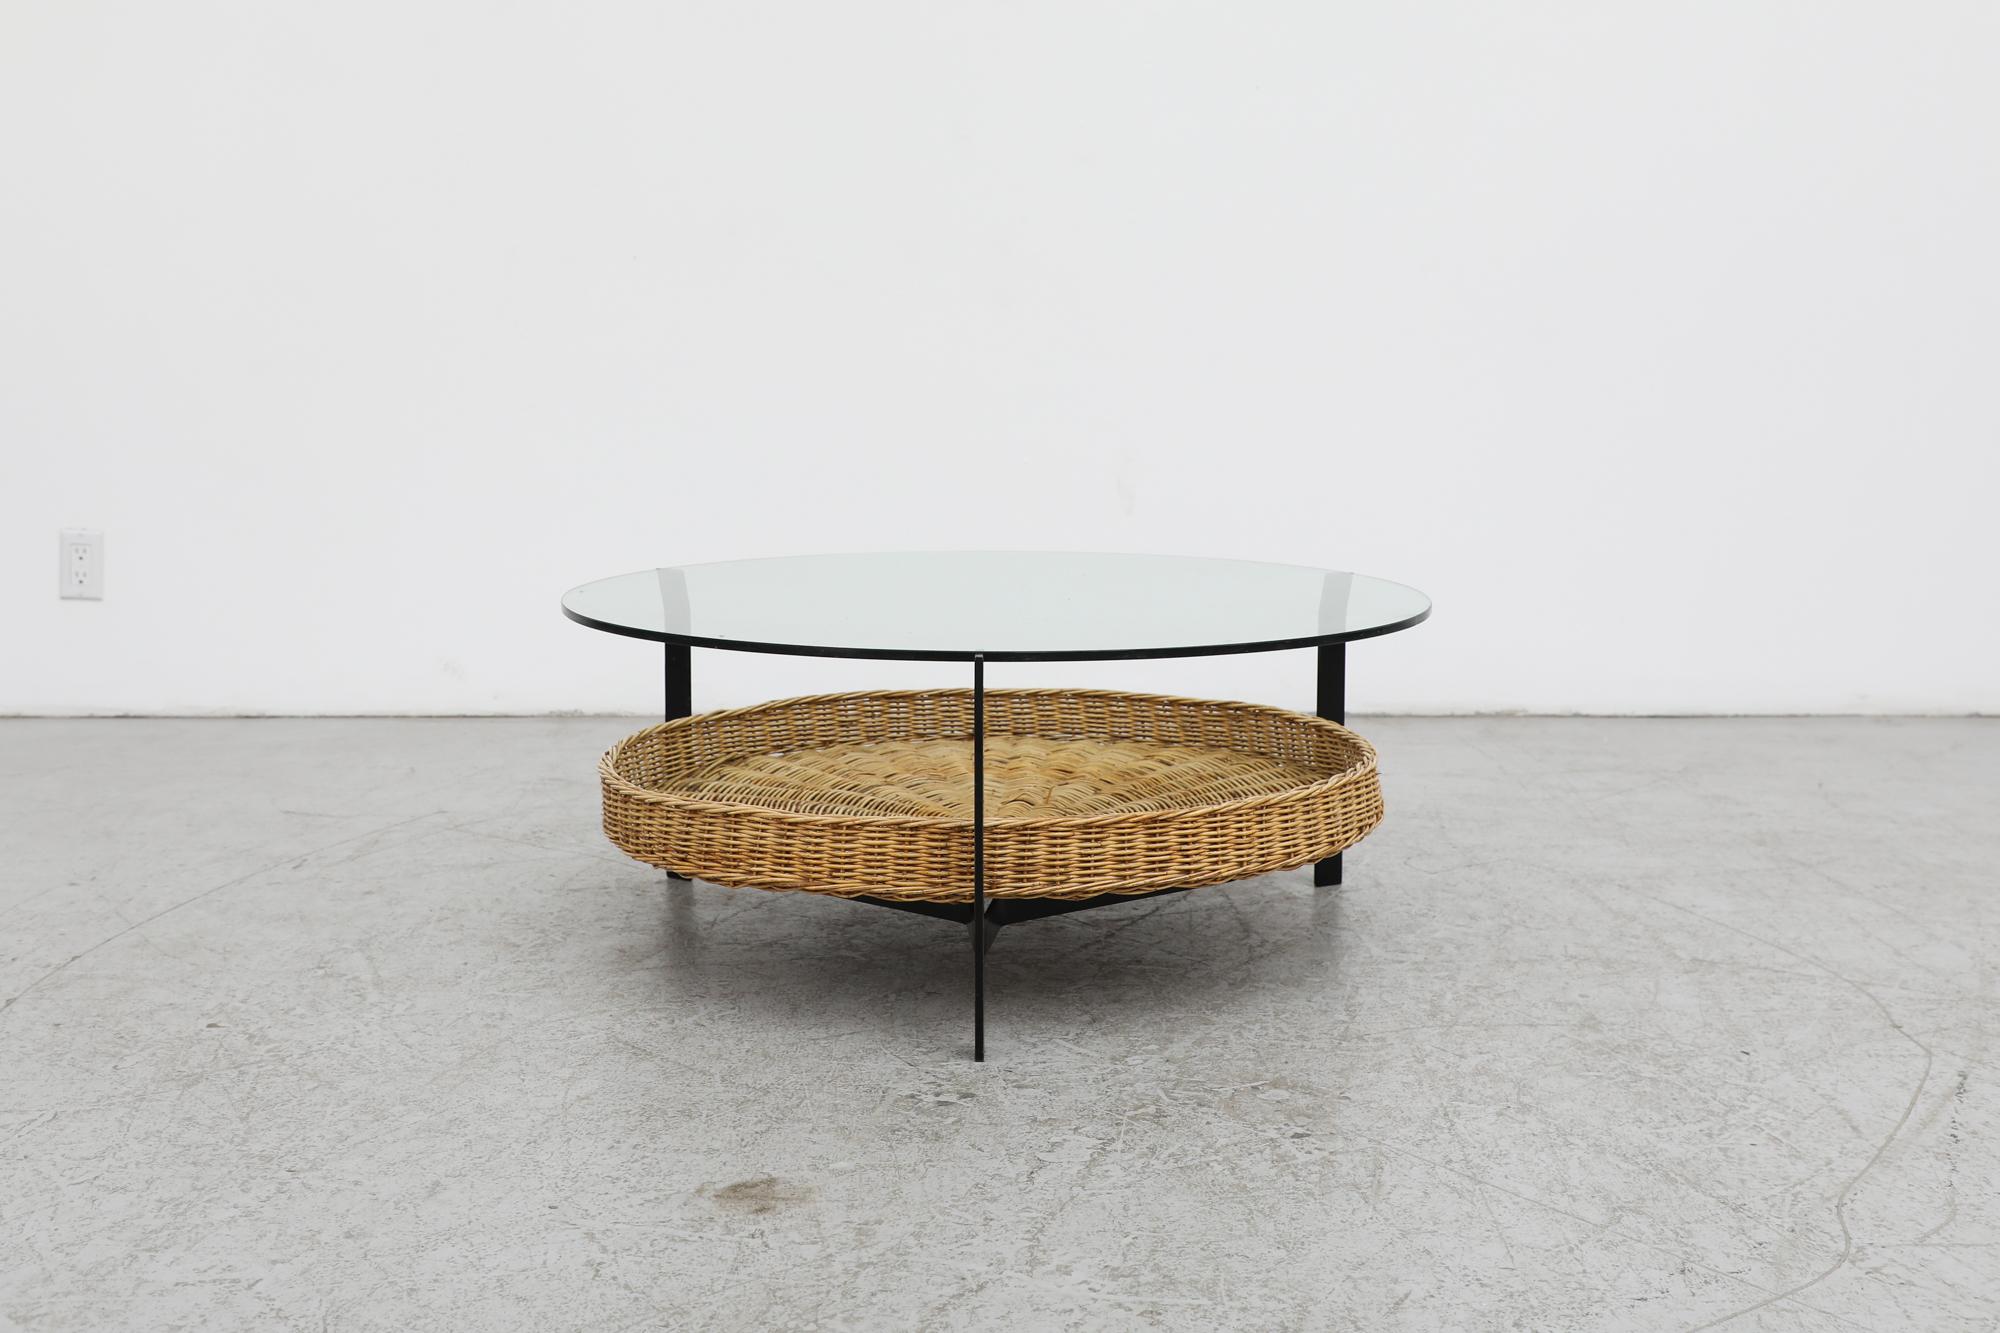 Mid-Century, Rudolf Wolf designed round glass coffee table with woven wicker basket and black enameled metal frame. The flat black steel frame curves slightly outwards to hold the glass. The glass shows visible wear and scratching. In original